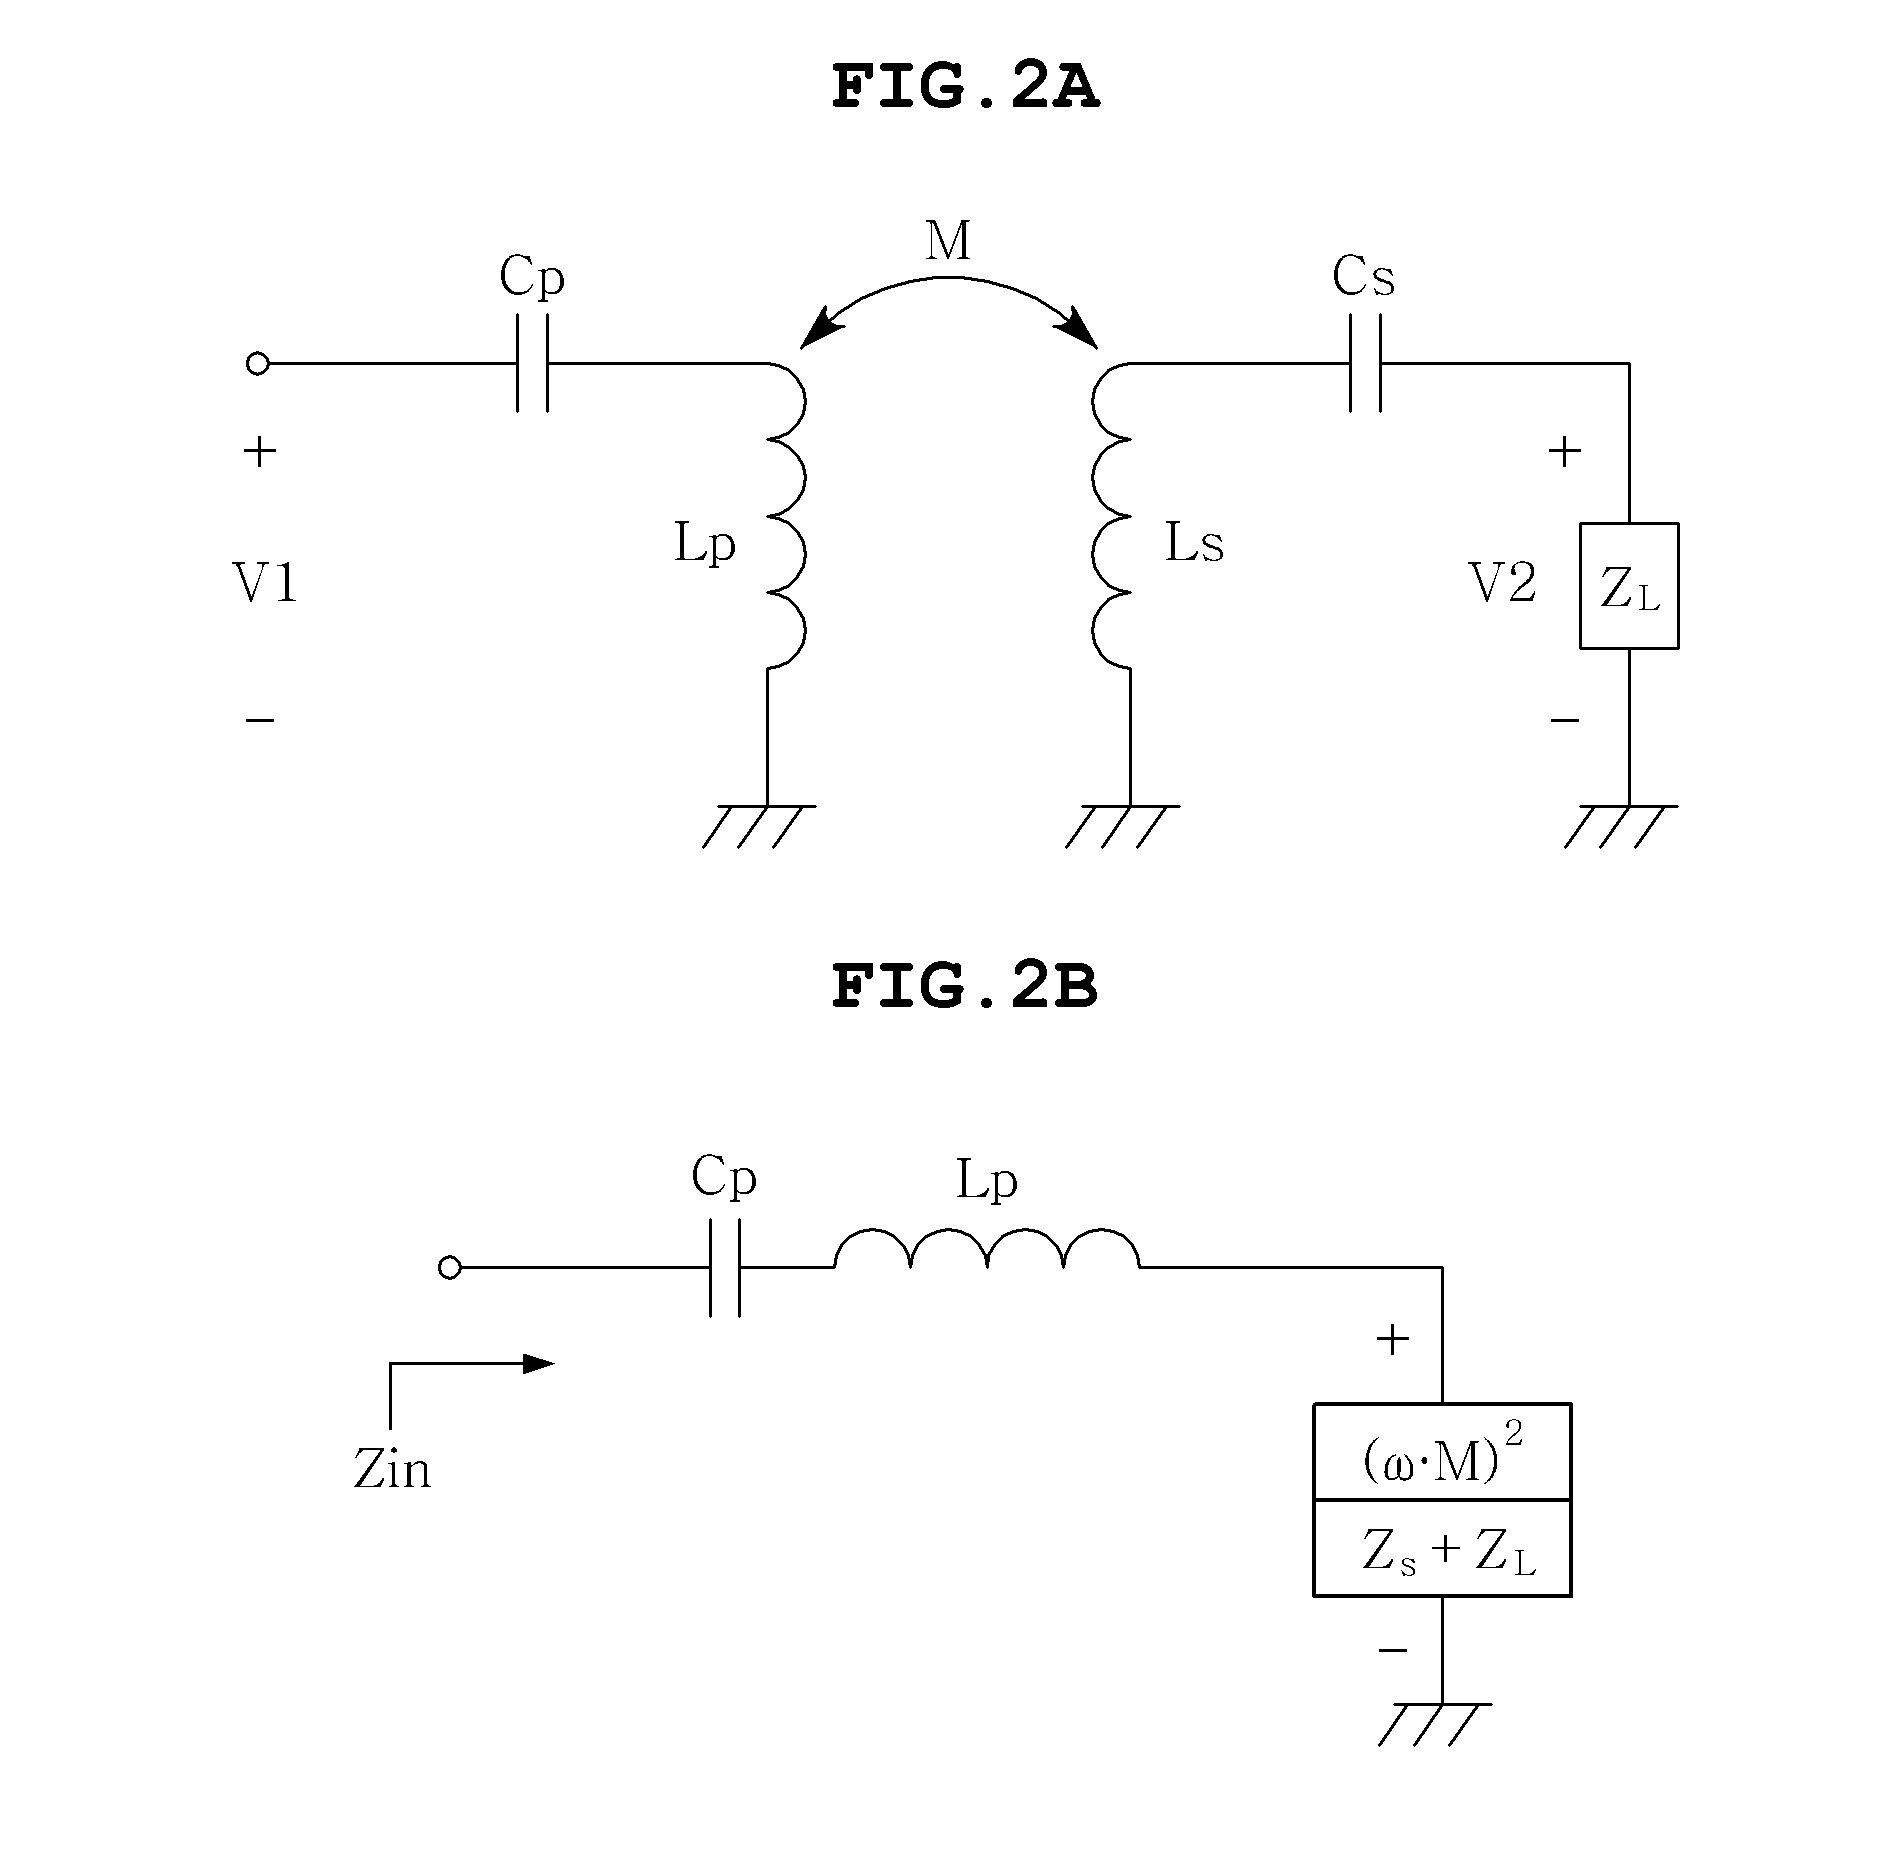 Wireless power transmission/reception apparatus and method